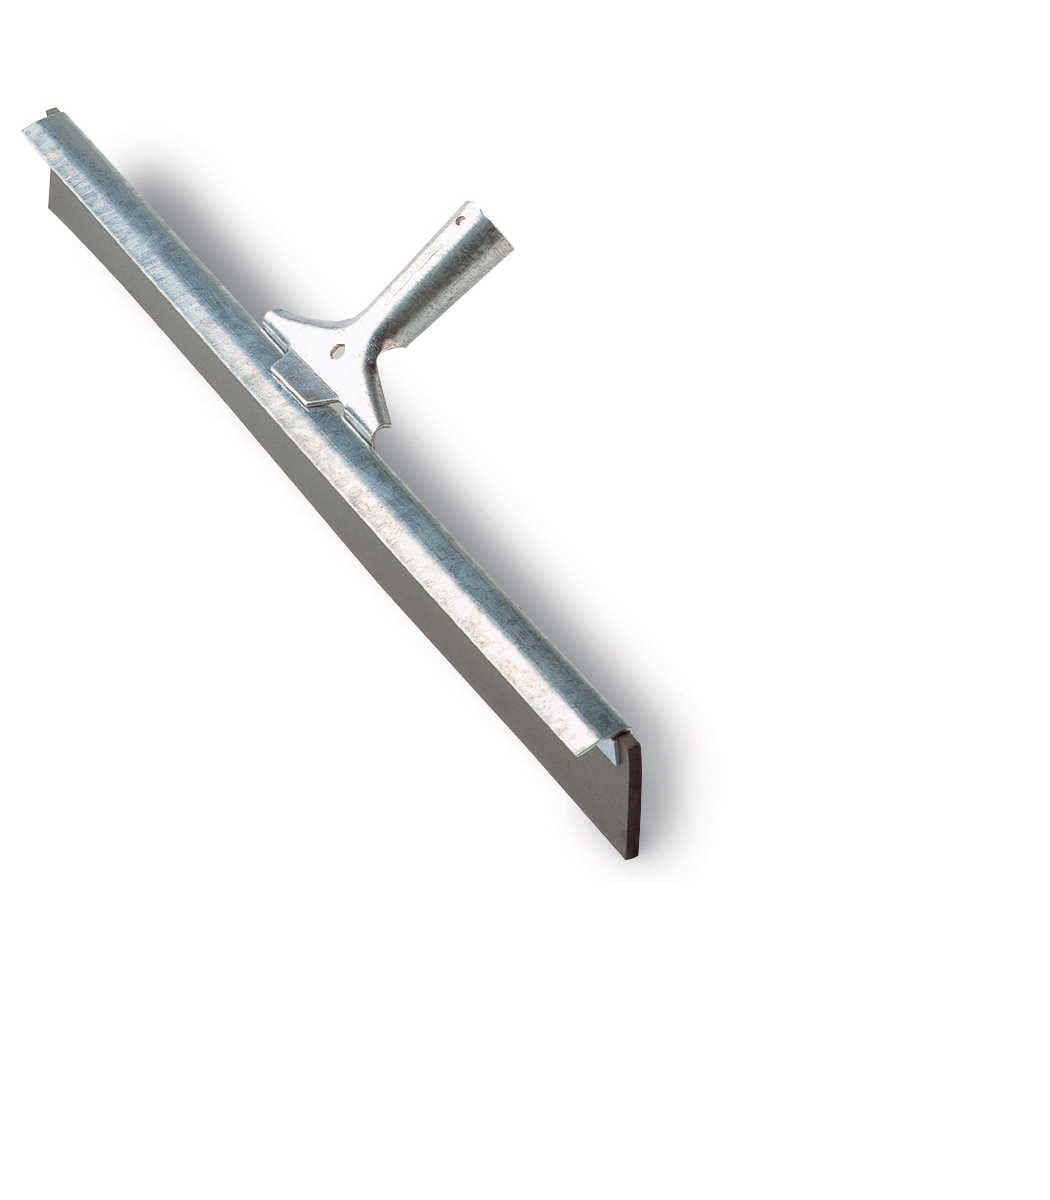 RW Clean Stainless Steel Floor Squeegee - 17 3/4 x 5 x 1 1/2 - 1 count  box